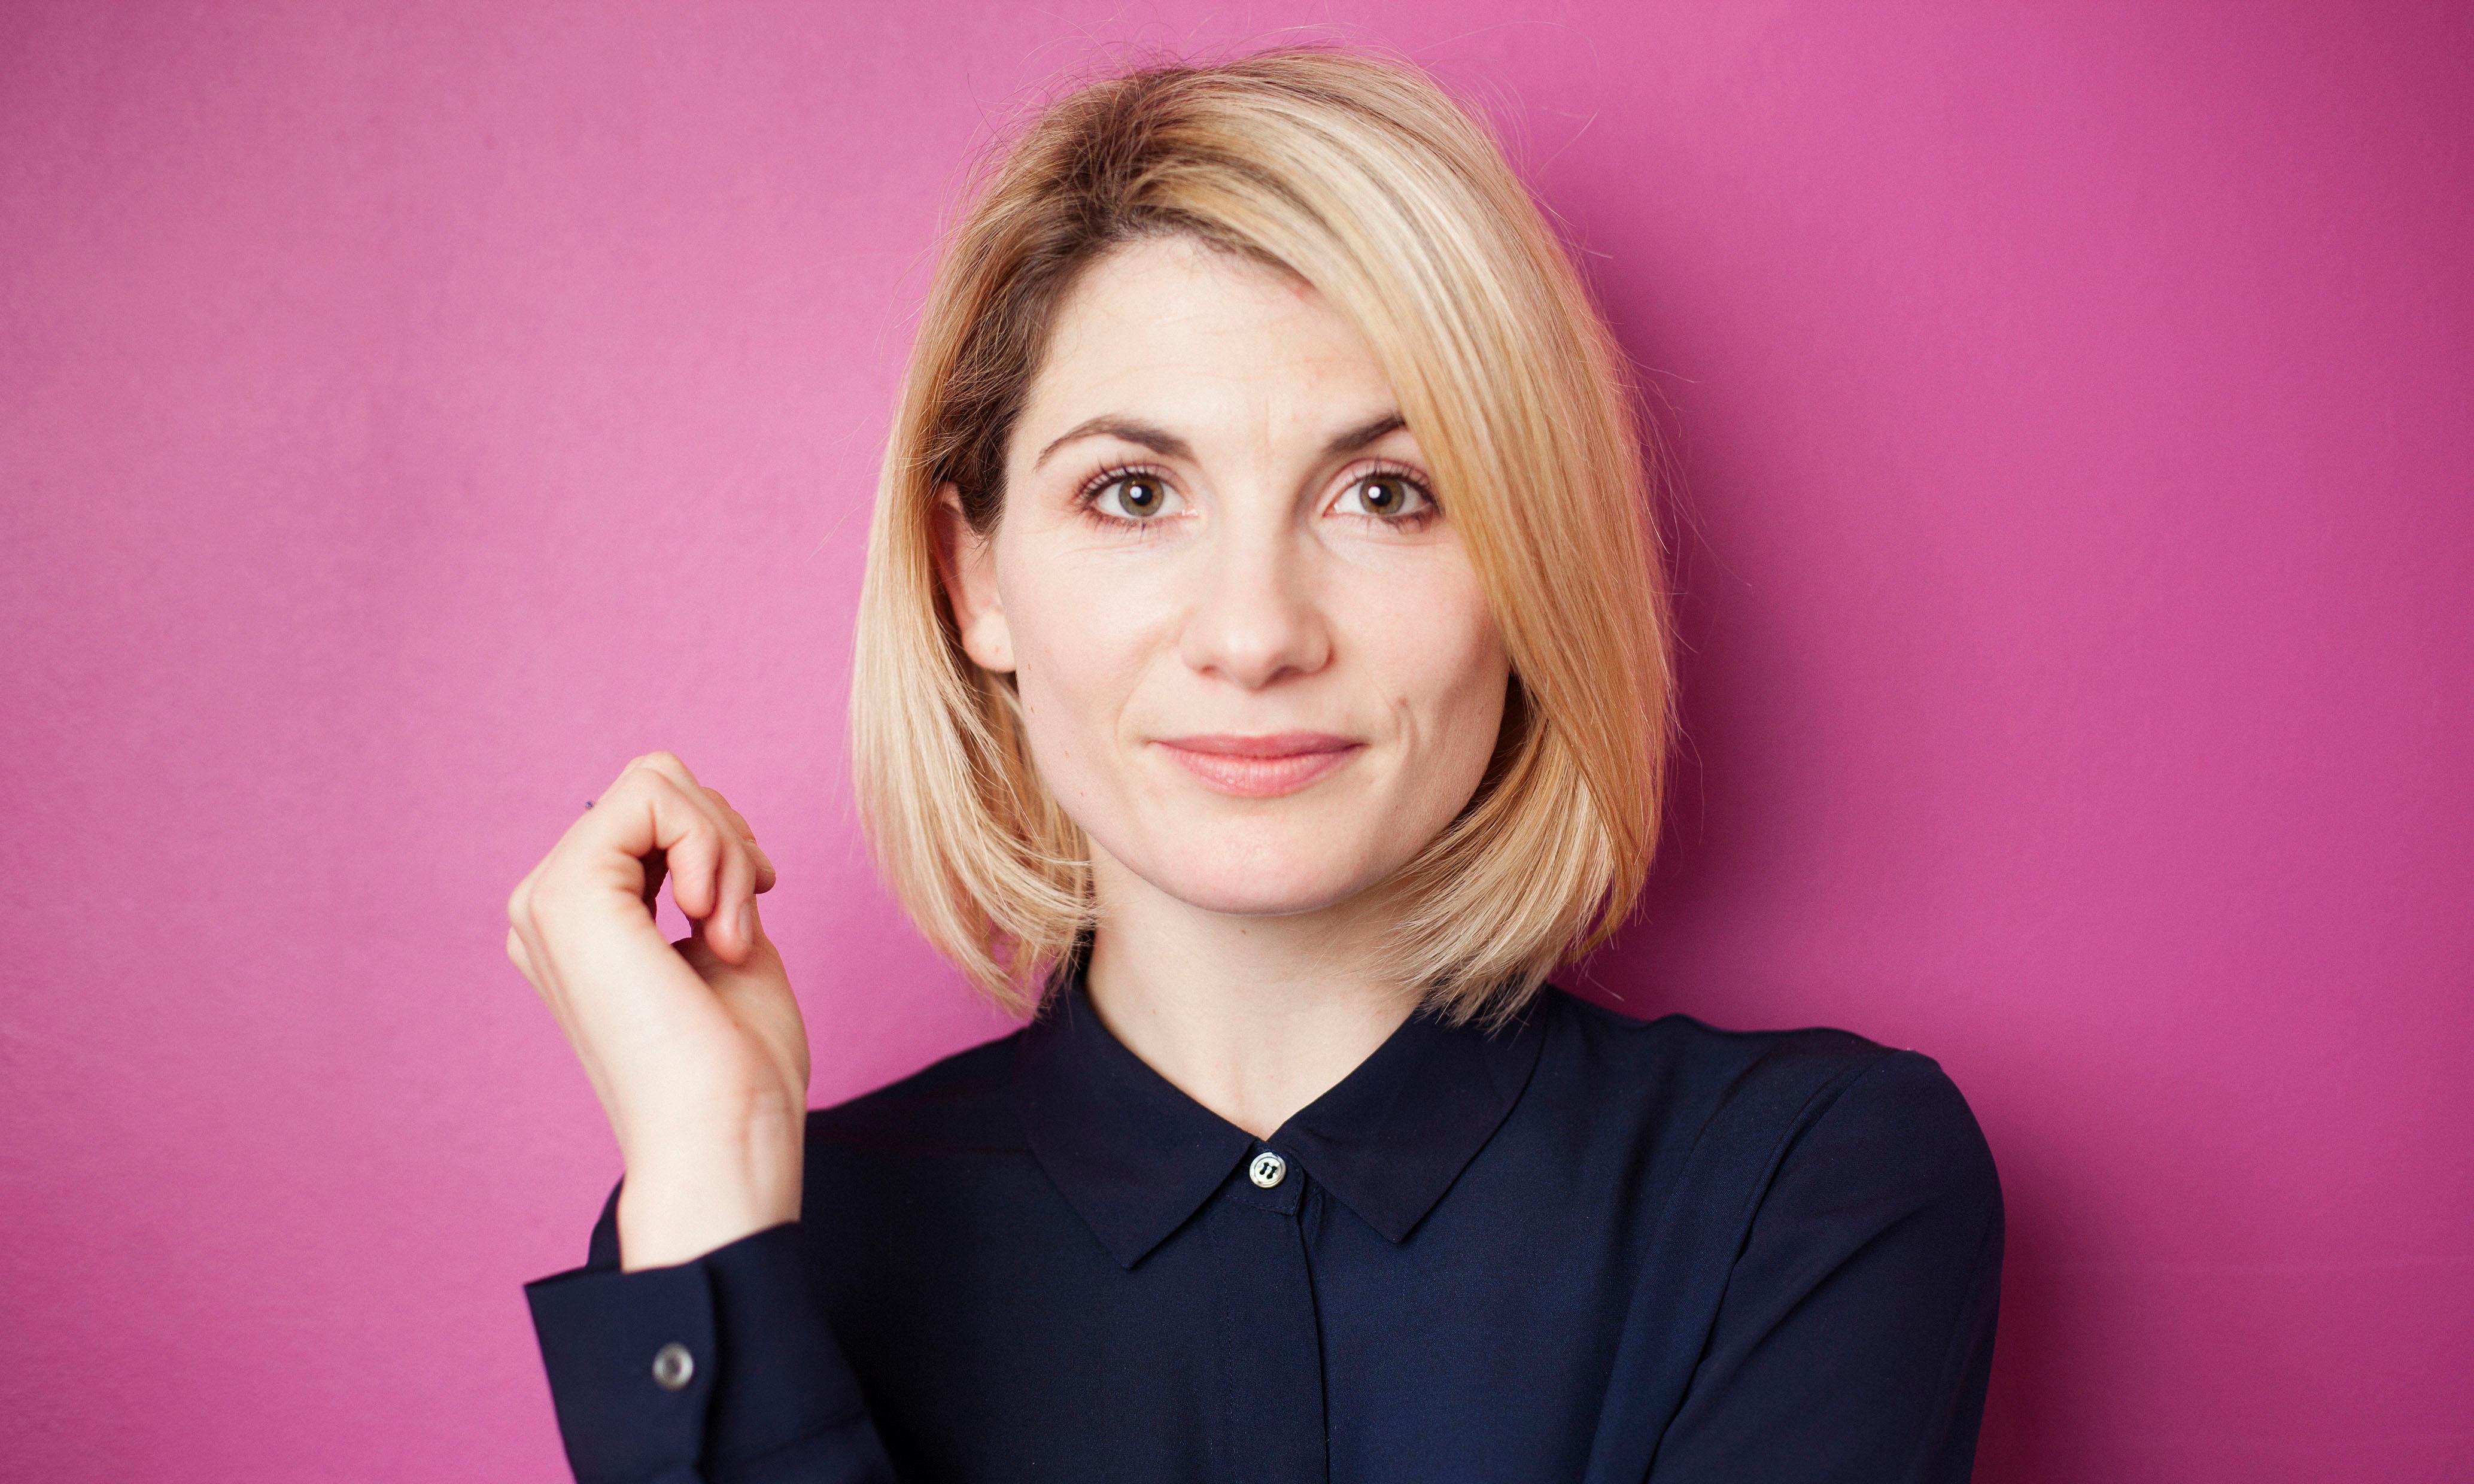 Jodie Whittaker Doctor Who Women The Doctor British 4134x2480